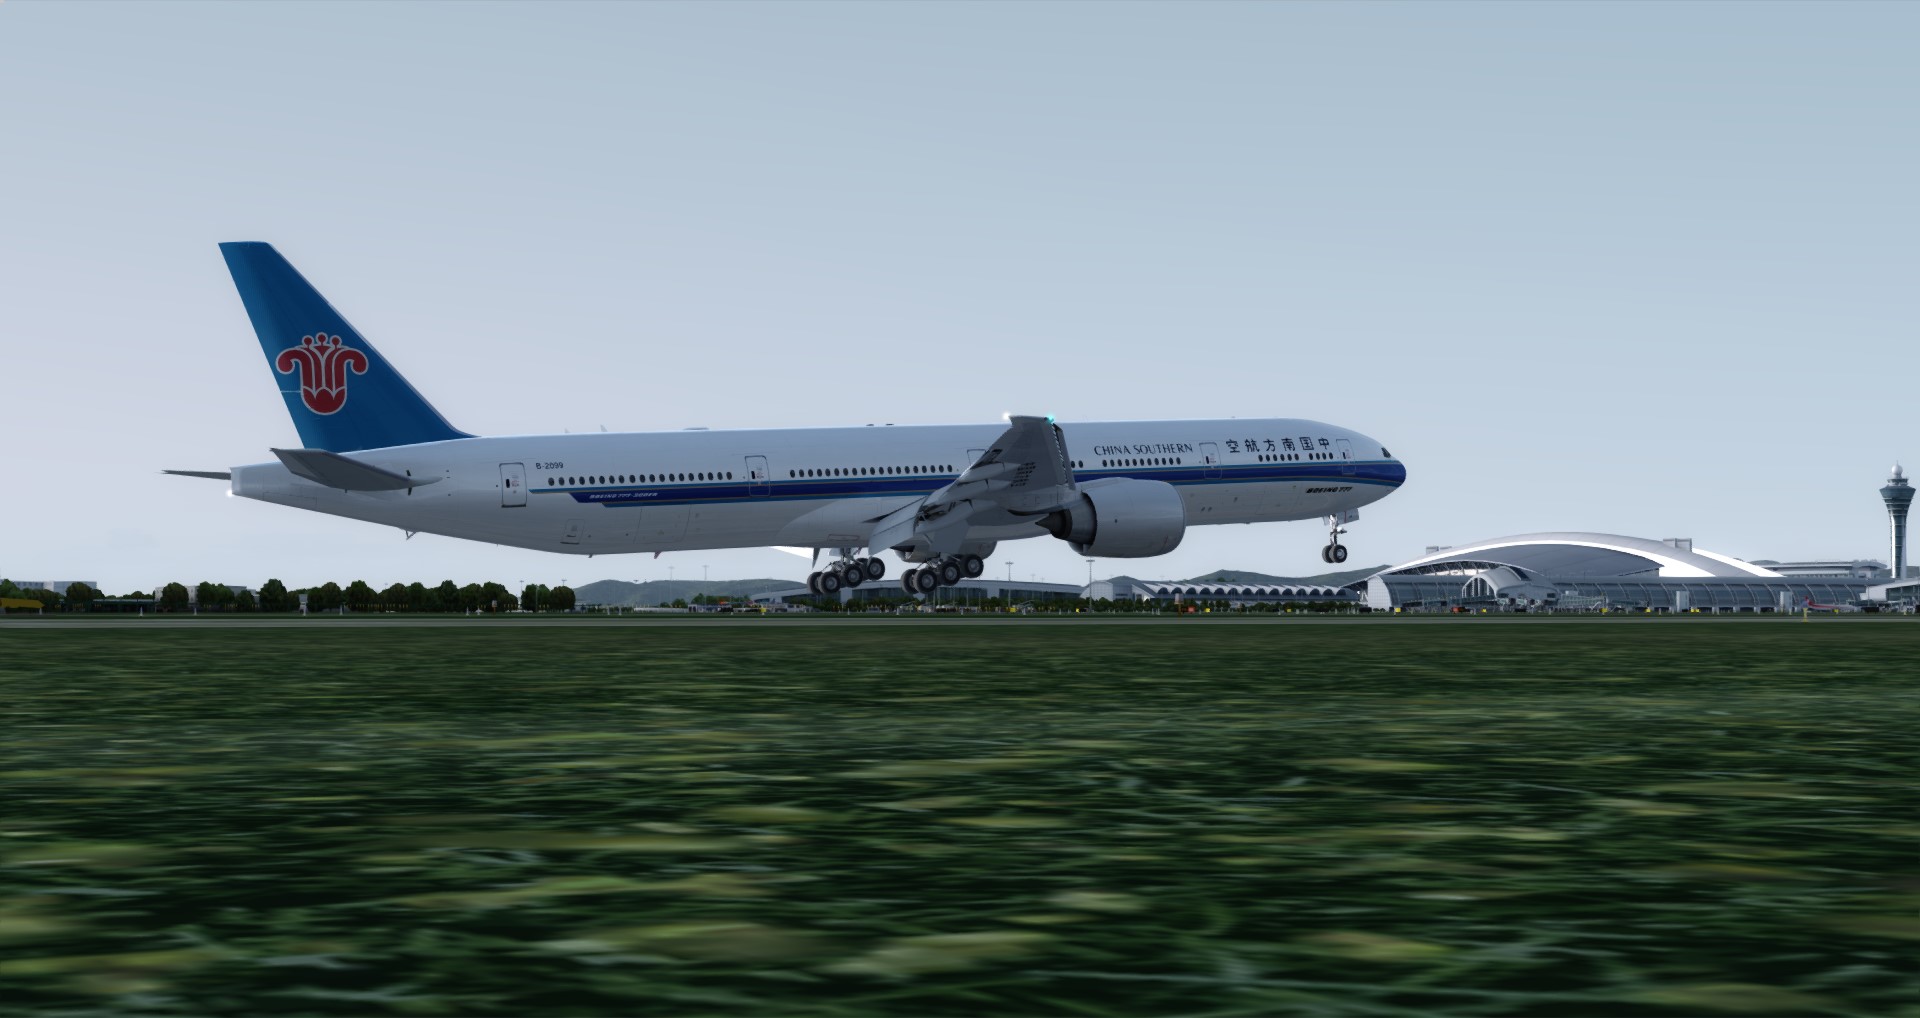 P3D V4 77W China Southern Airlines WADD-ZGGG 营救同胞-8189 